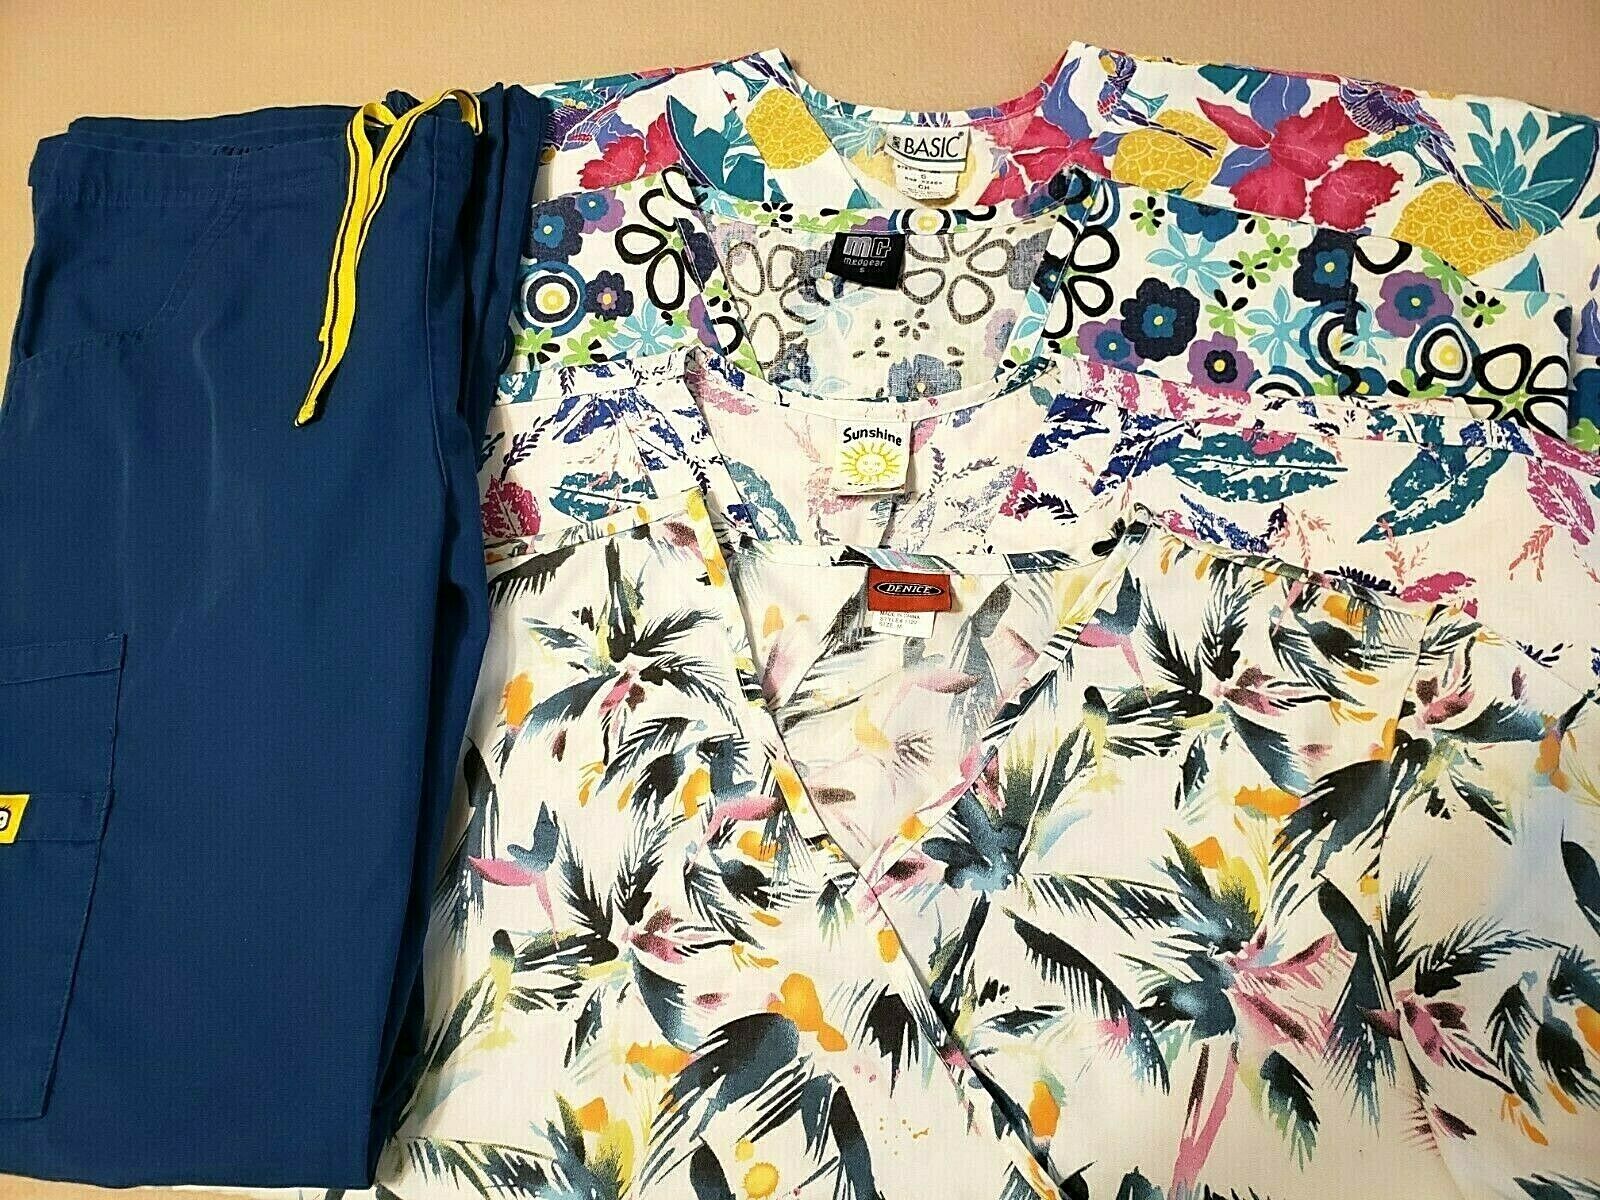 Women's Size Small Cotton Blend Mixed Lot: 4 Patterned Scrub Tops & 1 Pants